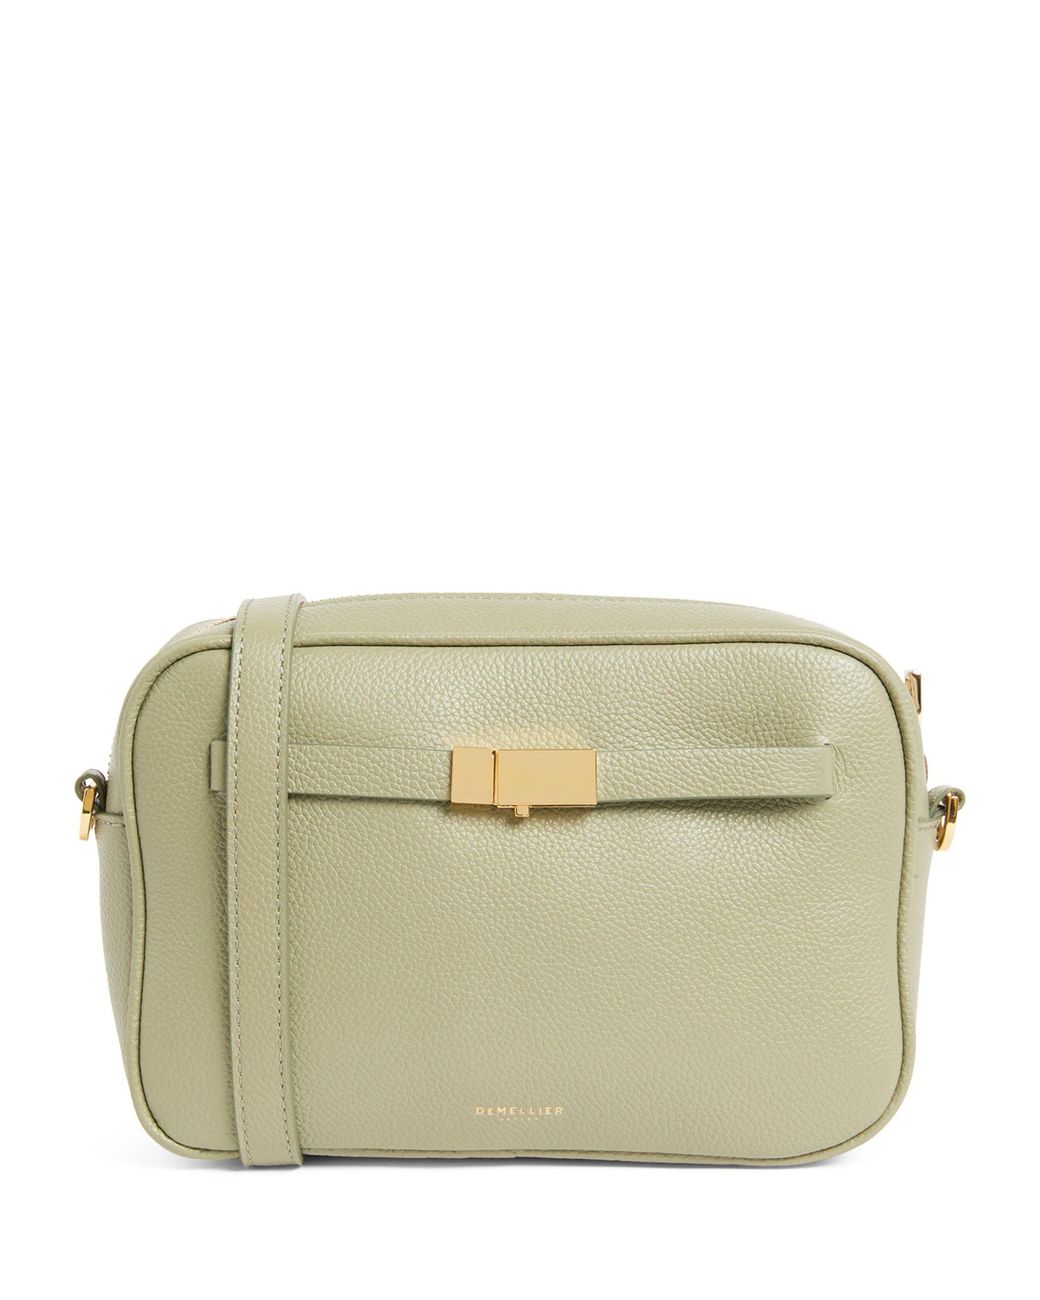 DeMellier Leather New York Cross-body Bag in Natural | Lyst